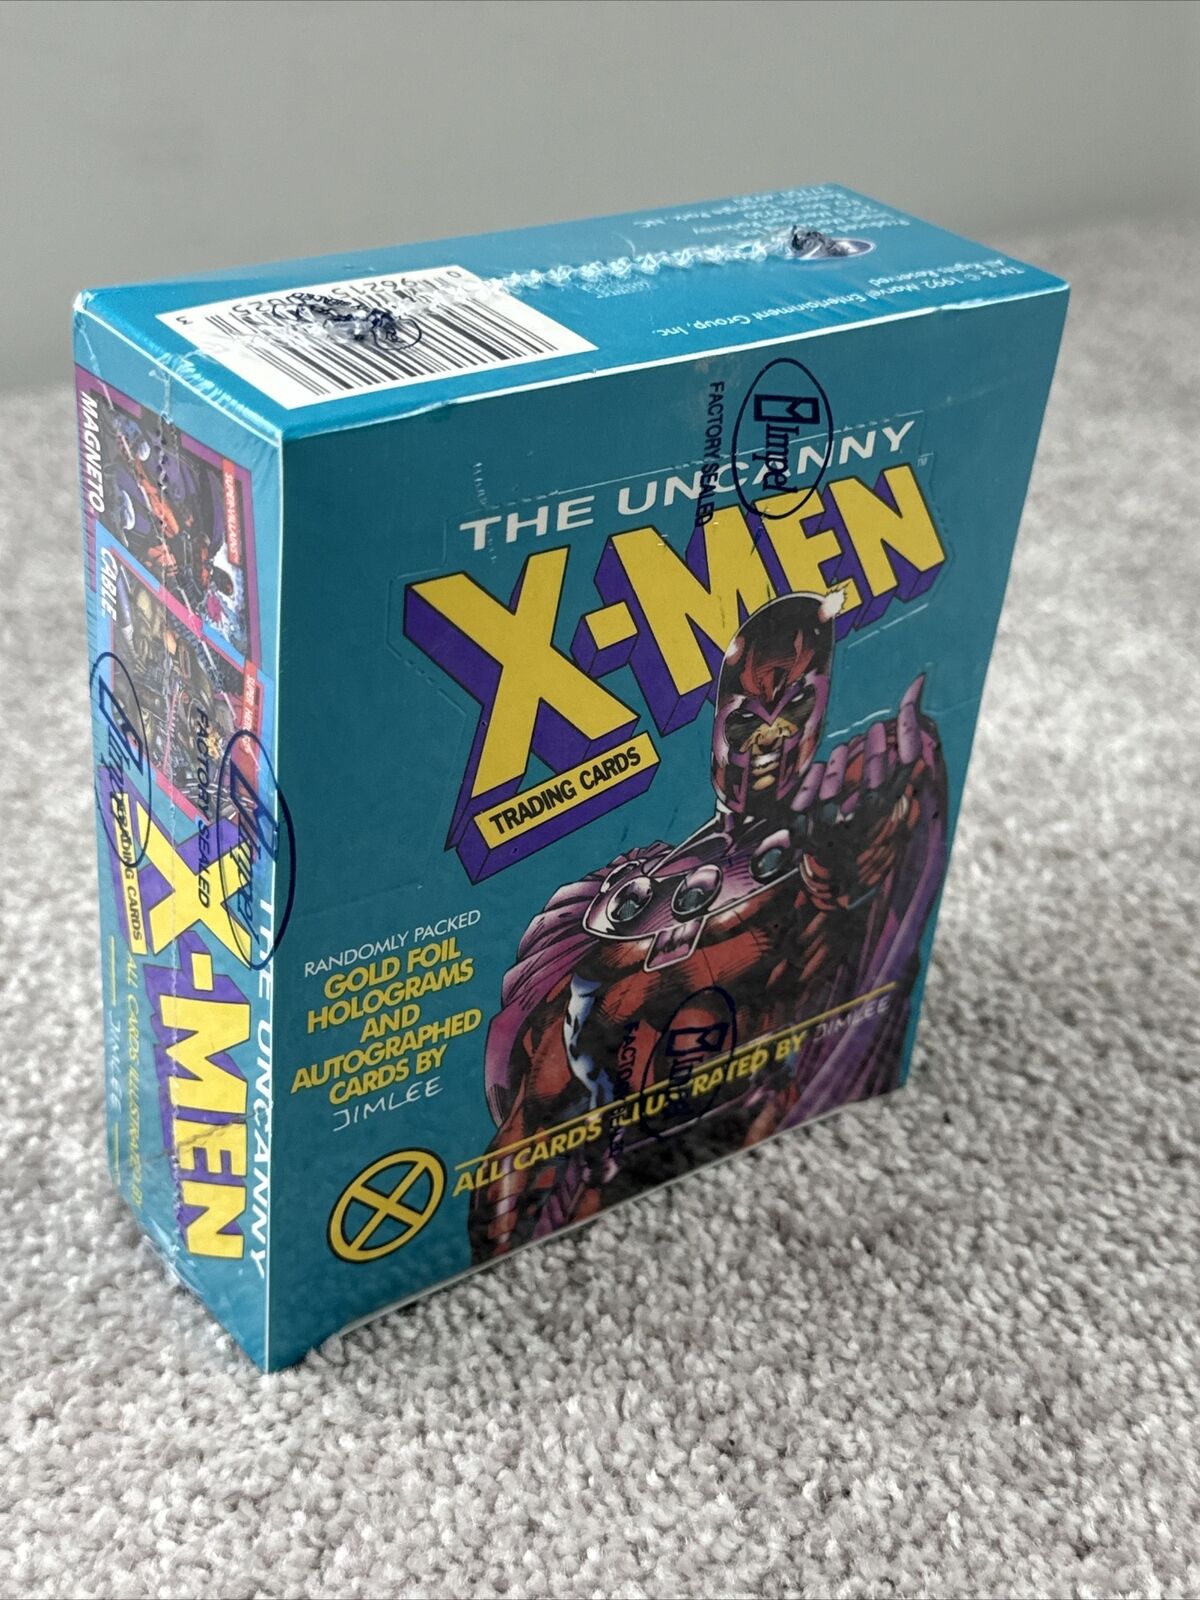 The Uncanny X-men Series 1 Trading Cards 1992 Factory SEALED Box Impel Marvel